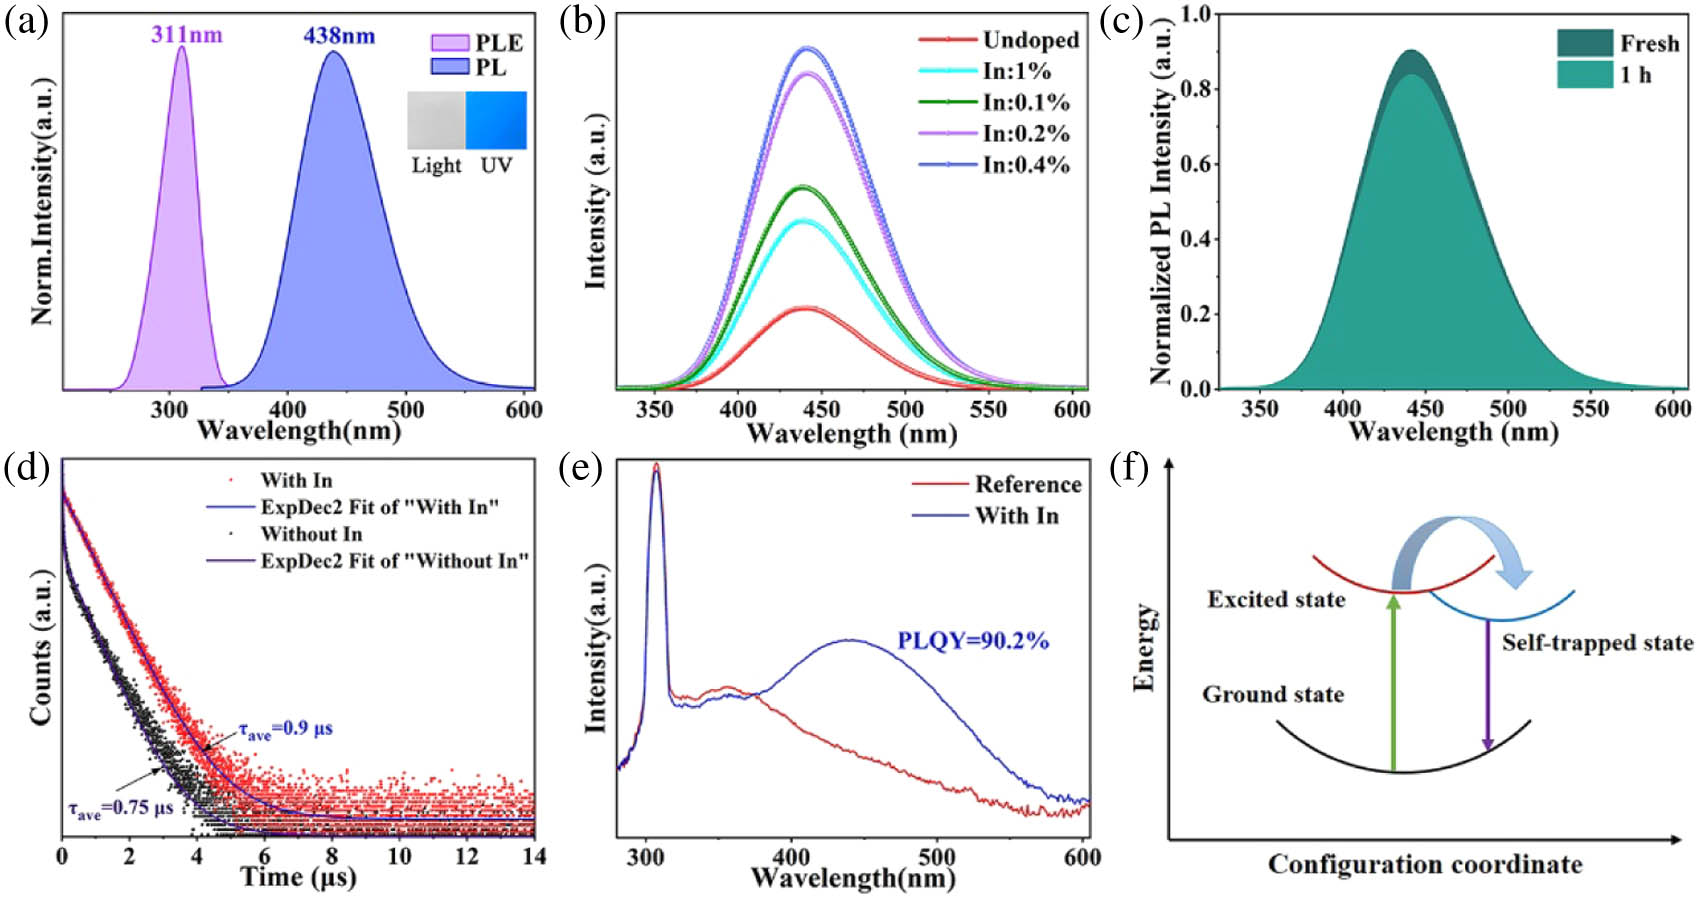 Ultraviolet detection performance of the Cs3Cu2I5:In films. (a) PL and PLE spectra of the Cs3Cu2I5:In films. (b) PL emission spectra of the Cs3Cu2I5 films doped with different indium concentrations. (c) Comparison of the PL spectra of the films before and after being soaked in deionized water for 1 h. (d) PL decay spectra of the Cs3Cu2I5 films with and without In+. (e) PLQY spectra of the Cs3Cu2I5:In films. (f) Configuration coordinate diagram of the photophysical dynamics in Cs3Cu2I5.